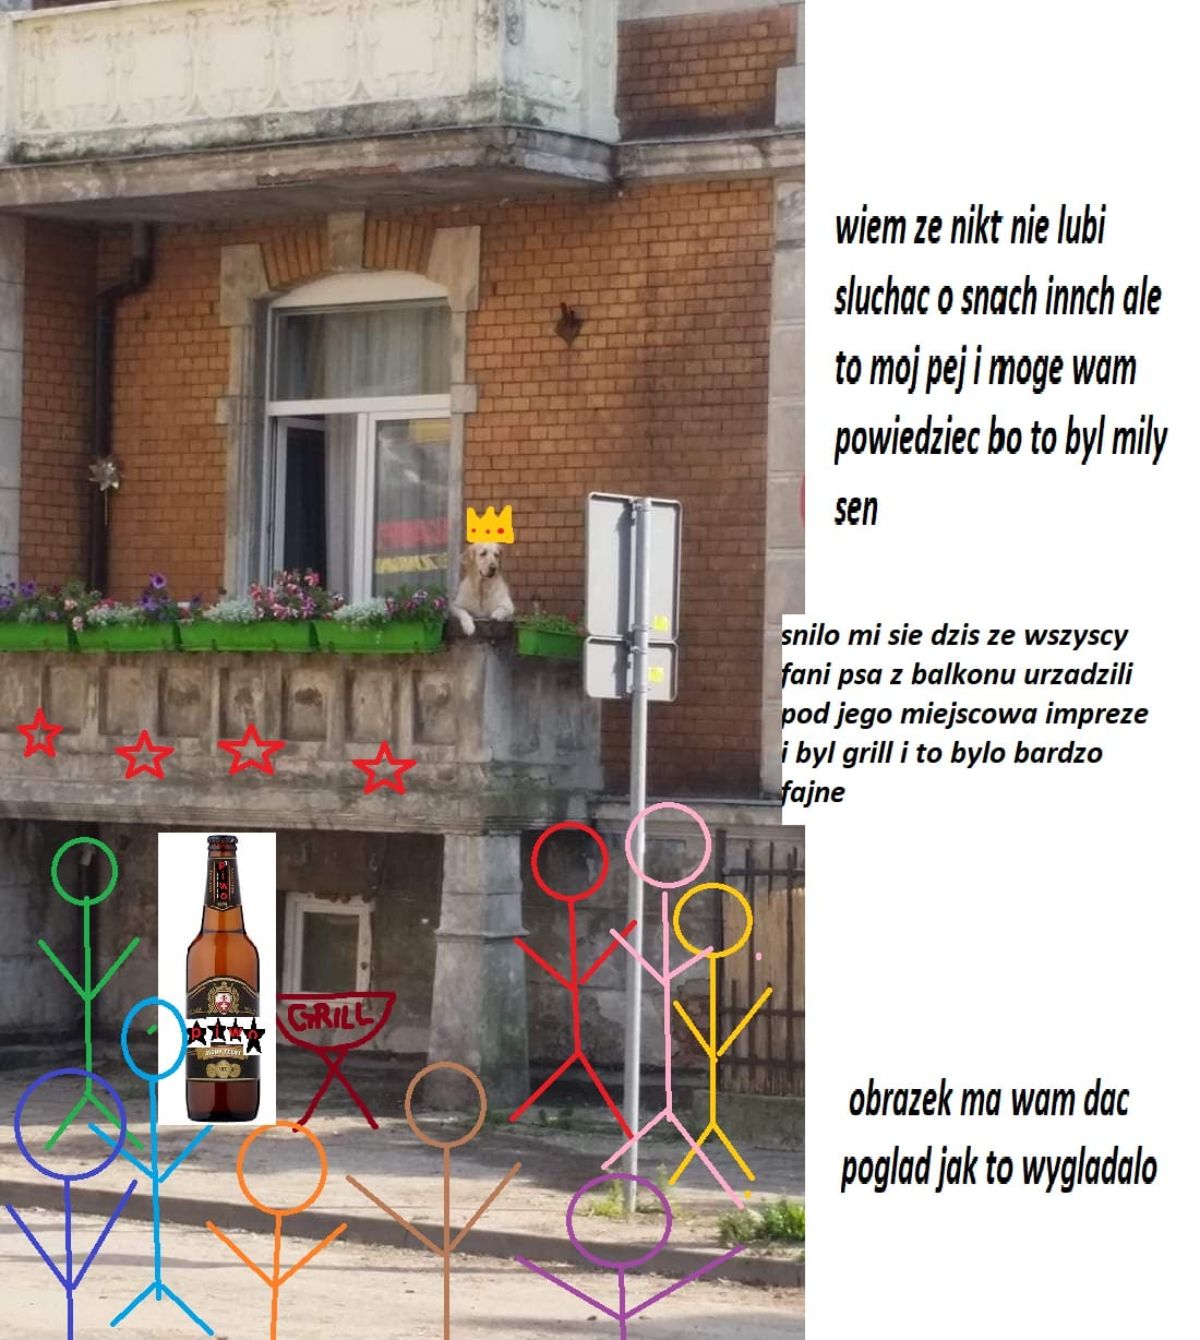 an image of a golden retriever hanging over a balcony photoshopped to have the dog with a crown with stick figures under the balcony with a bottle of beer and Polish text on the right